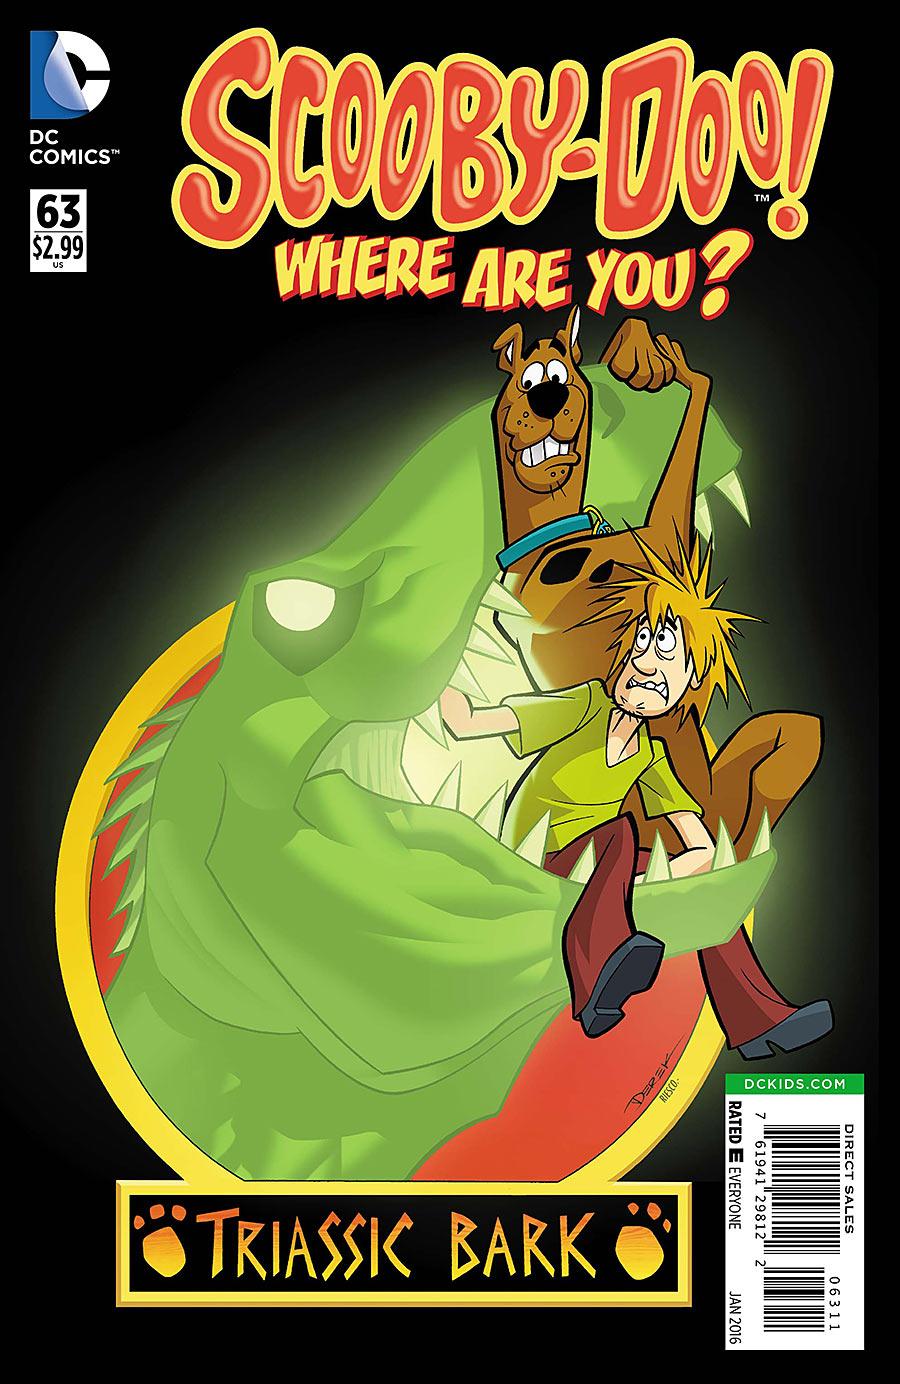 Scooby-Doo: Where Are You? Vol. 1 #63